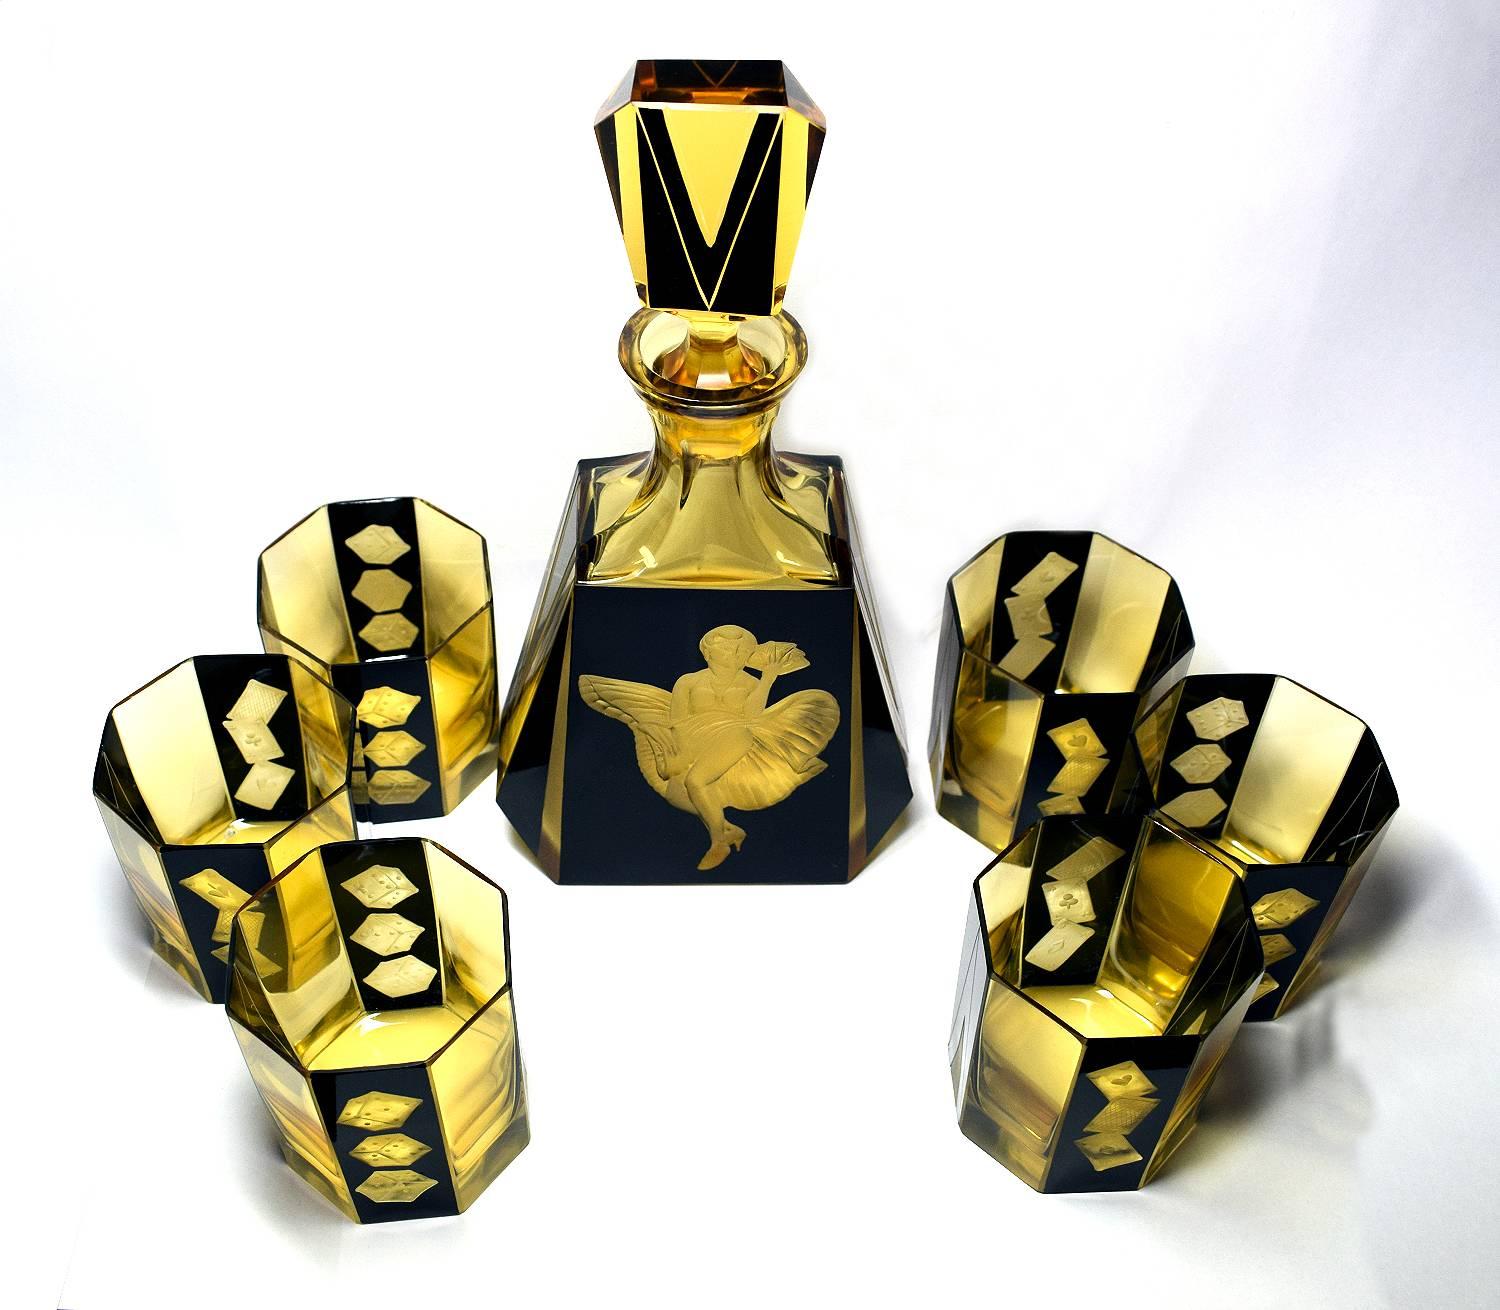 Czech High Style Art Deco Whisky Glass and Enamel Decanter Set by Karl Palda